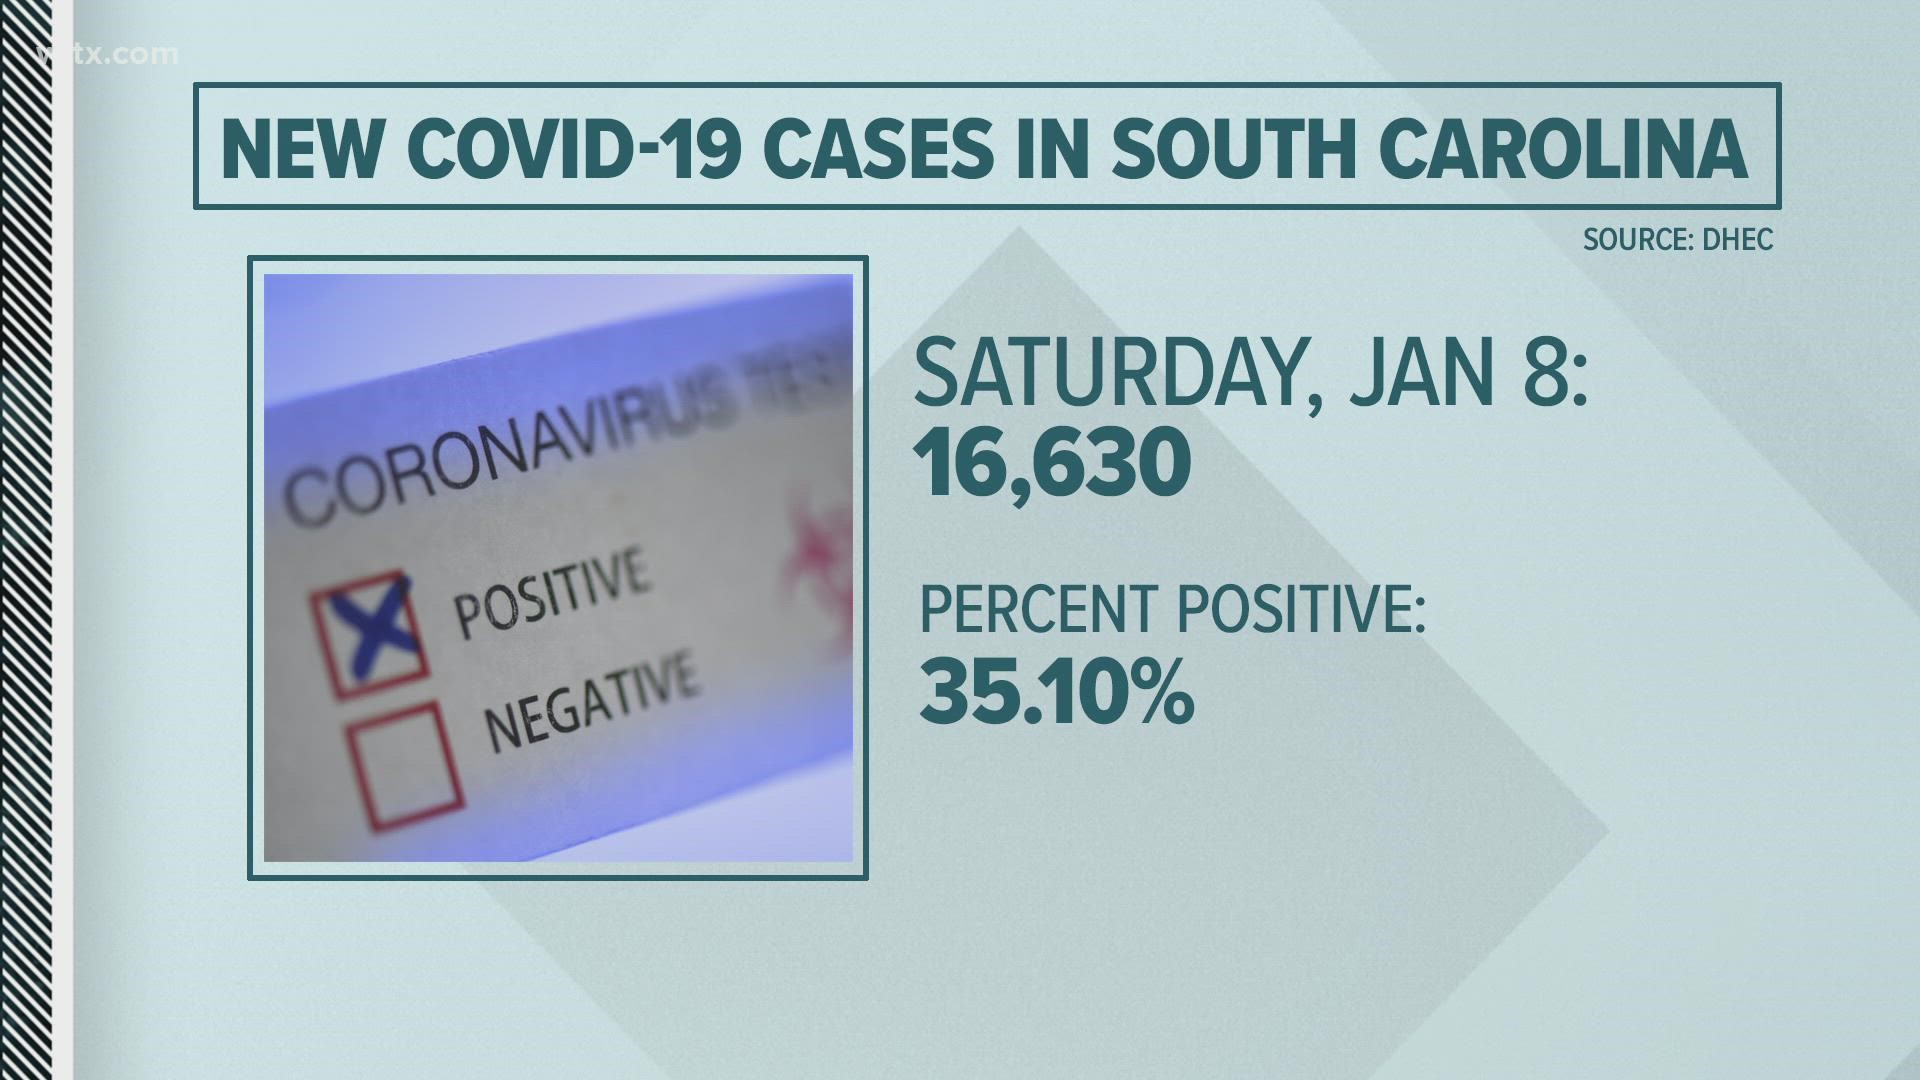 Over 16,600 cases reported on Saturday with a 35% positive rate.